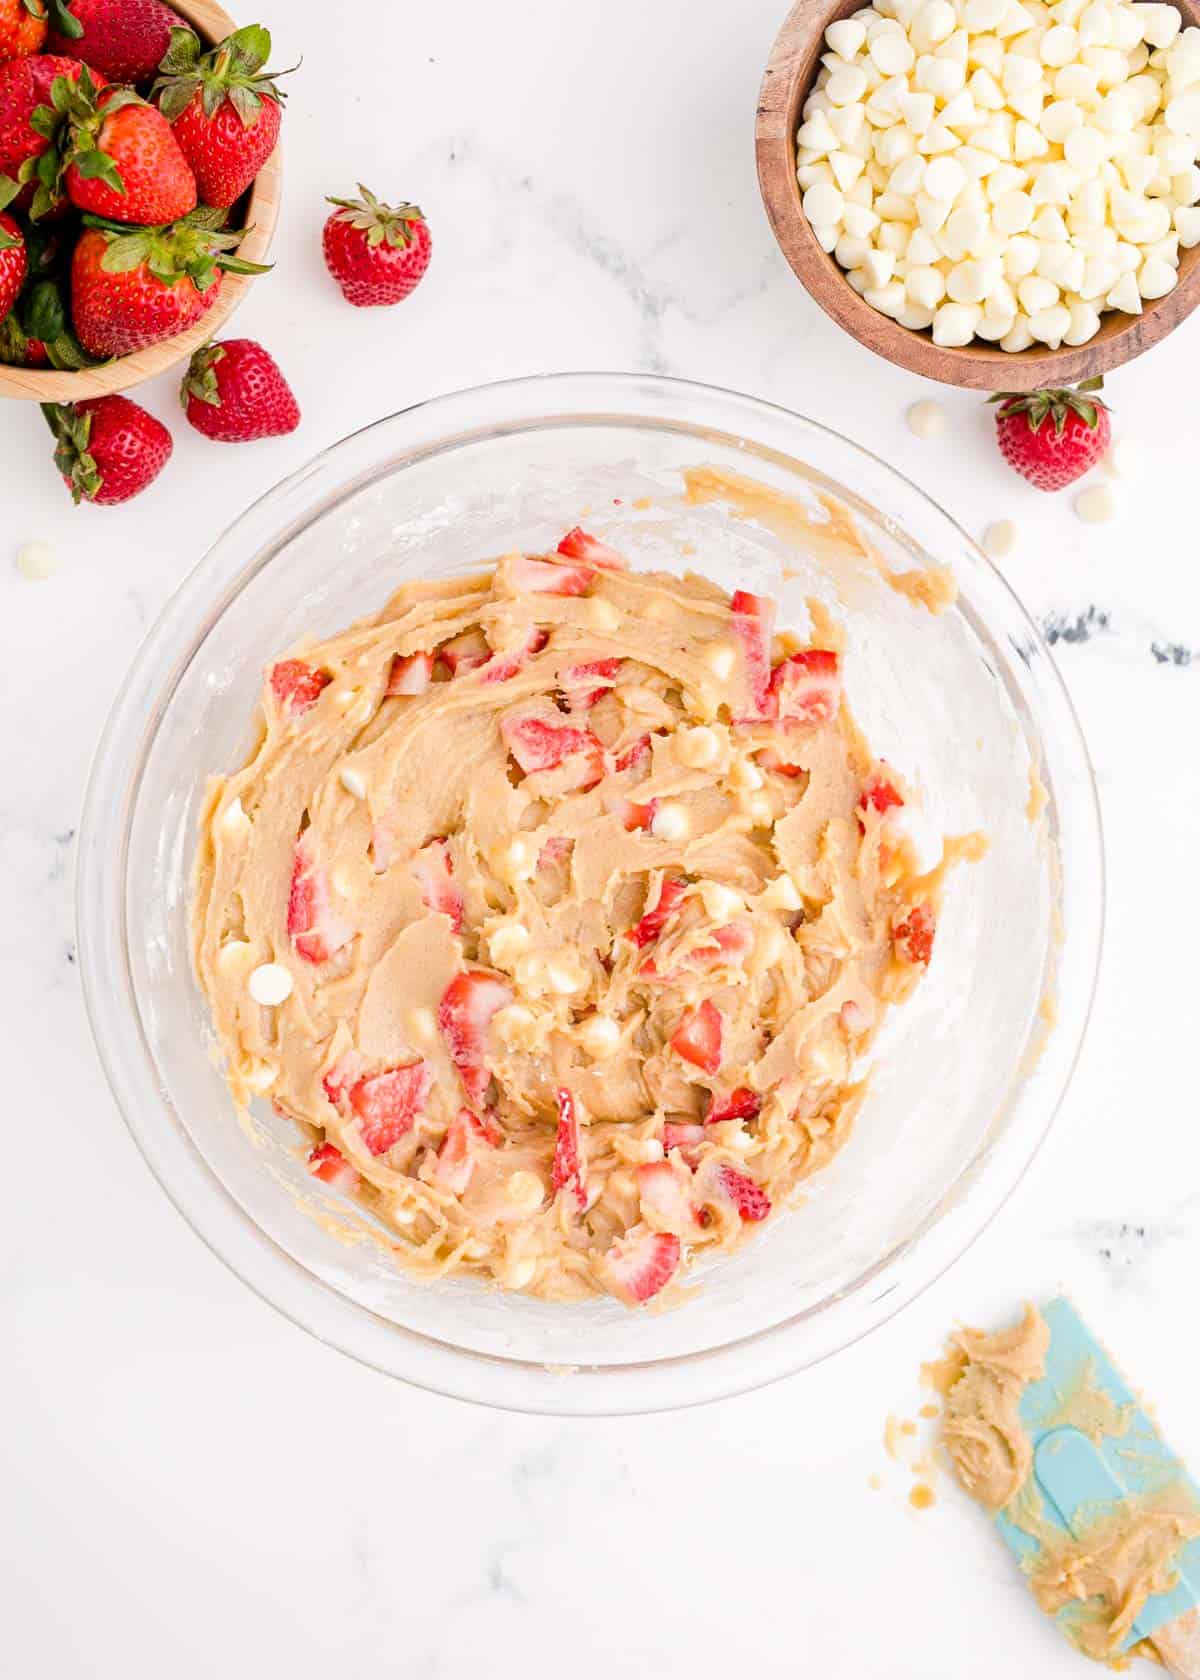 chopped fresh strawberries mixed into blondie mixture with white chocolate chips